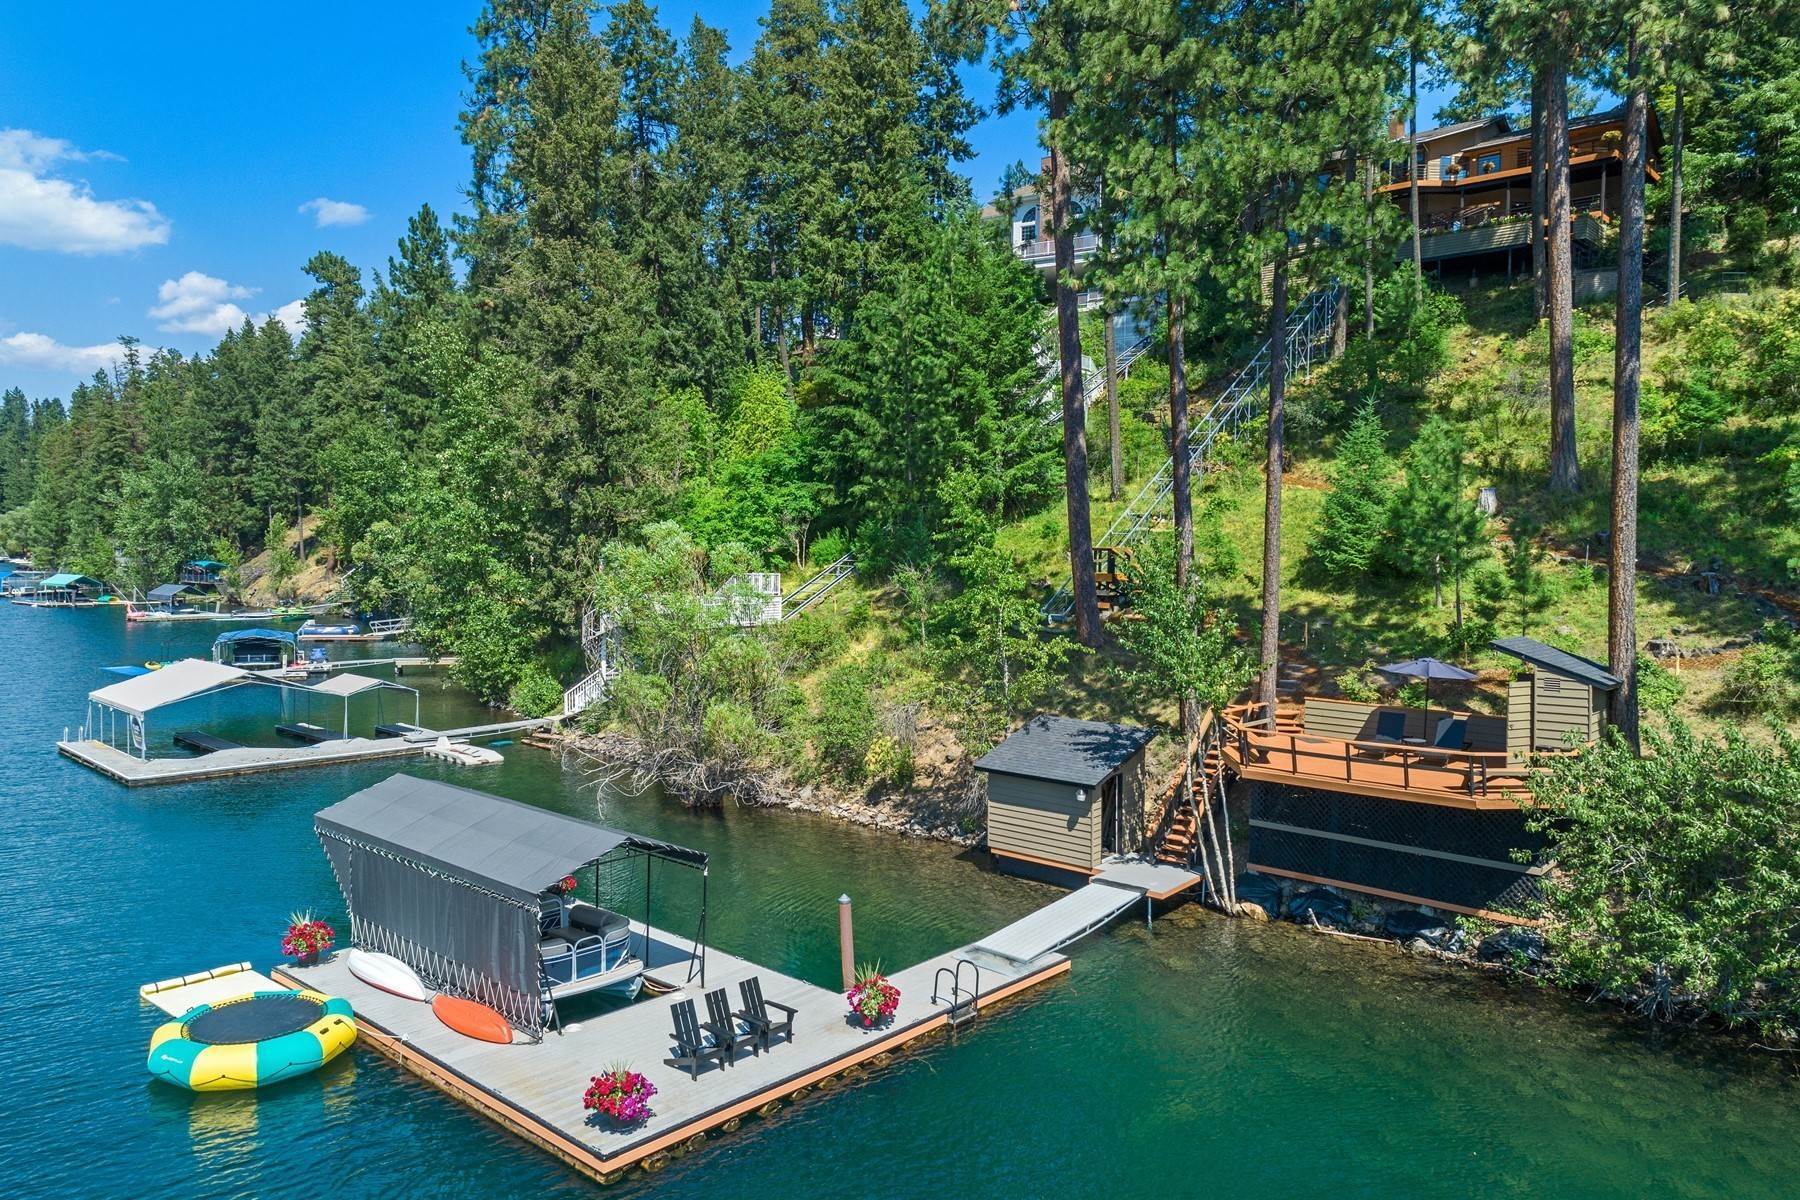 Single Family Homes for Sale at Waterfront Contemporary Beauty 2931 E Point Hayden Dr Hayden Lake, Idaho 83835 United States